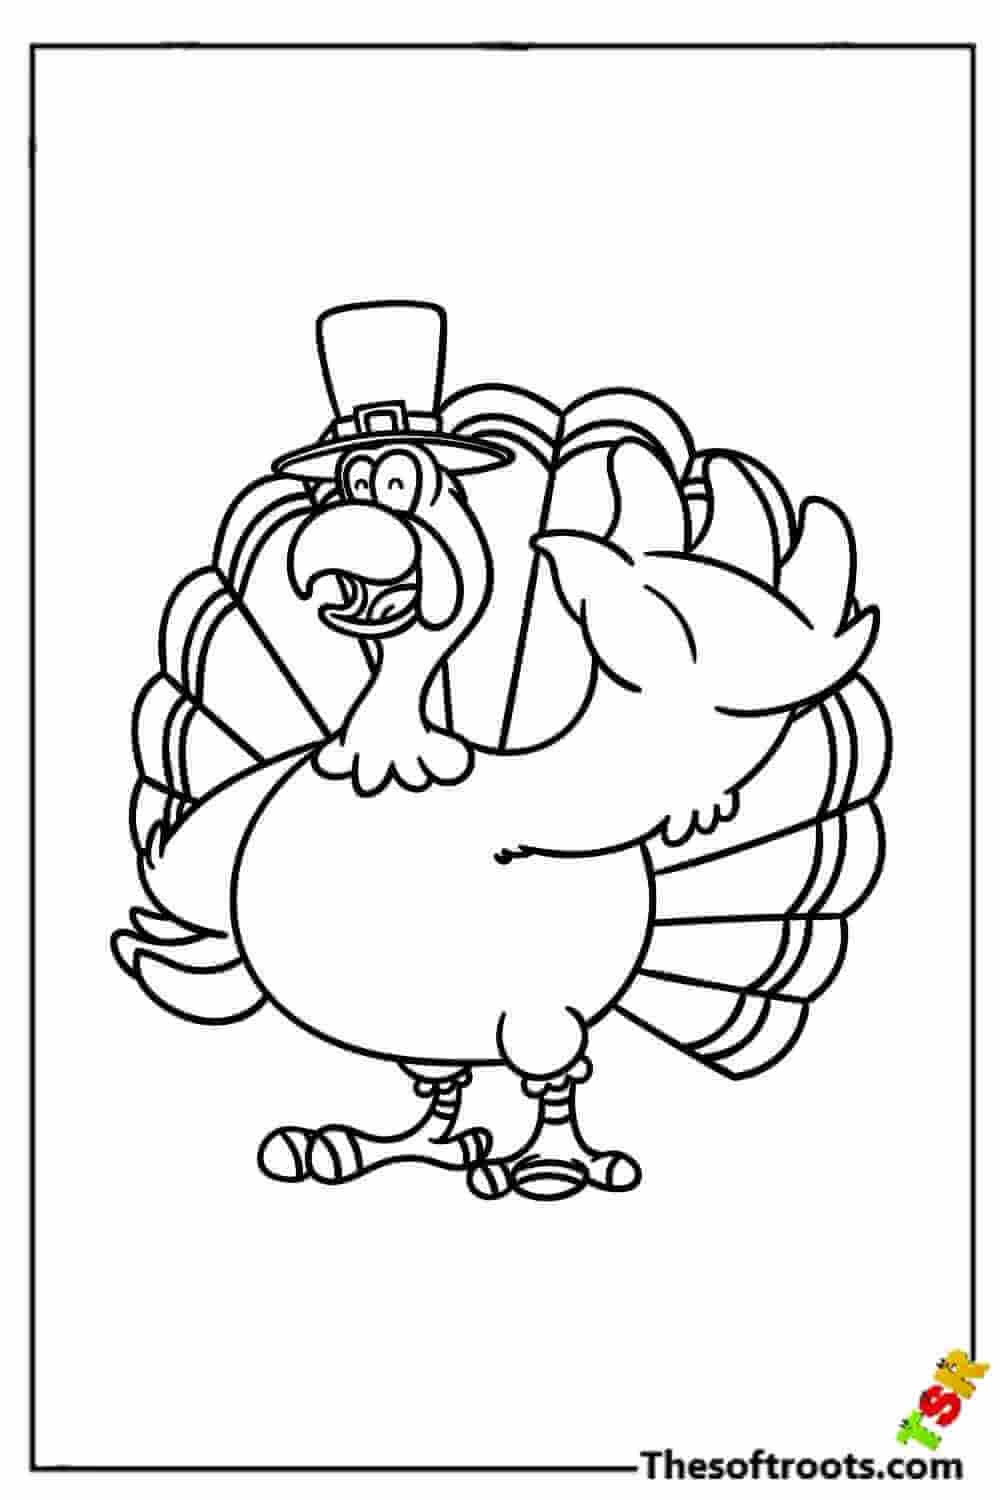 Turkey with cap coloring pages